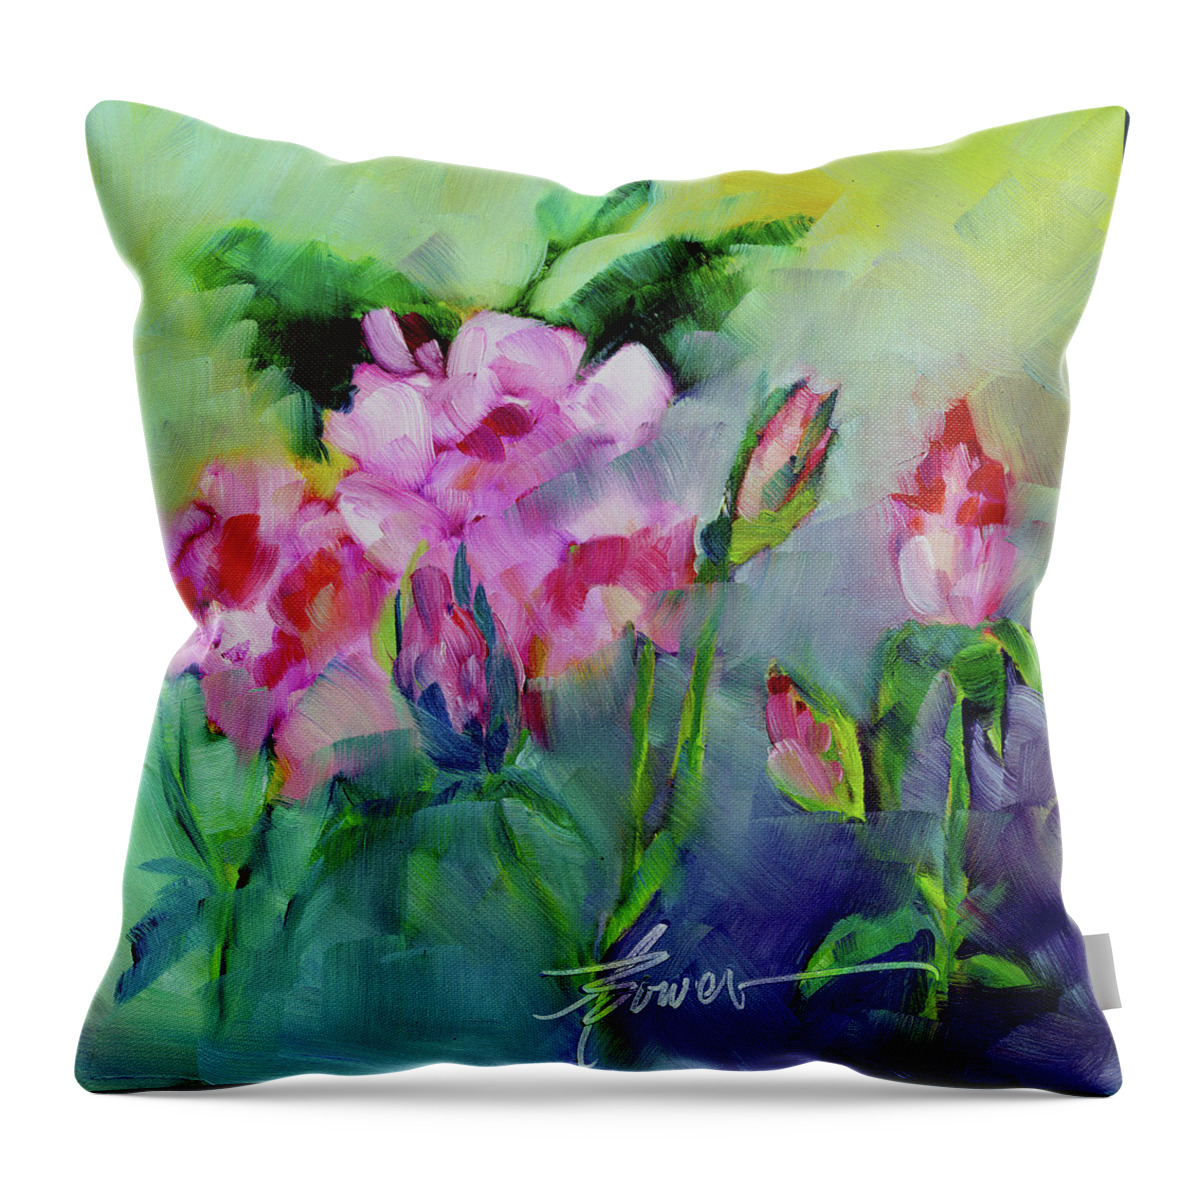 Roses Throw Pillow featuring the painting Fantasy by Adele Bower